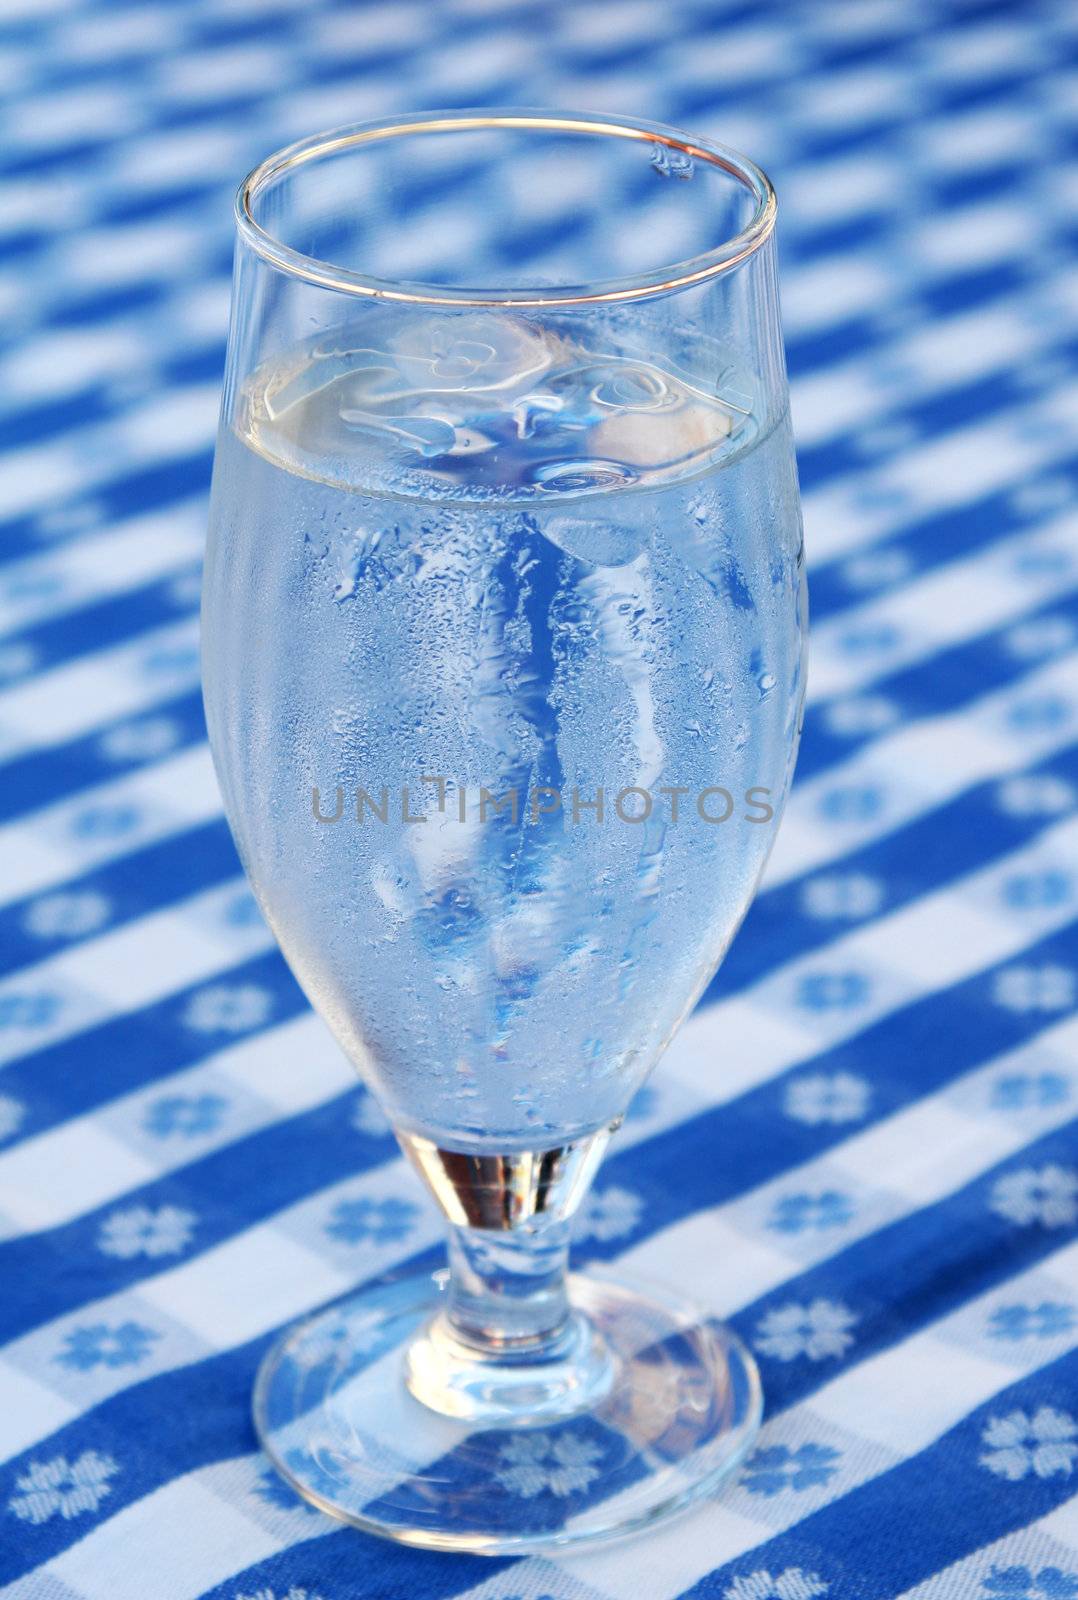 A glass of iced water, standing on a blue and white tablecloth, ice cubes in glass and condensed water on glass due to heat